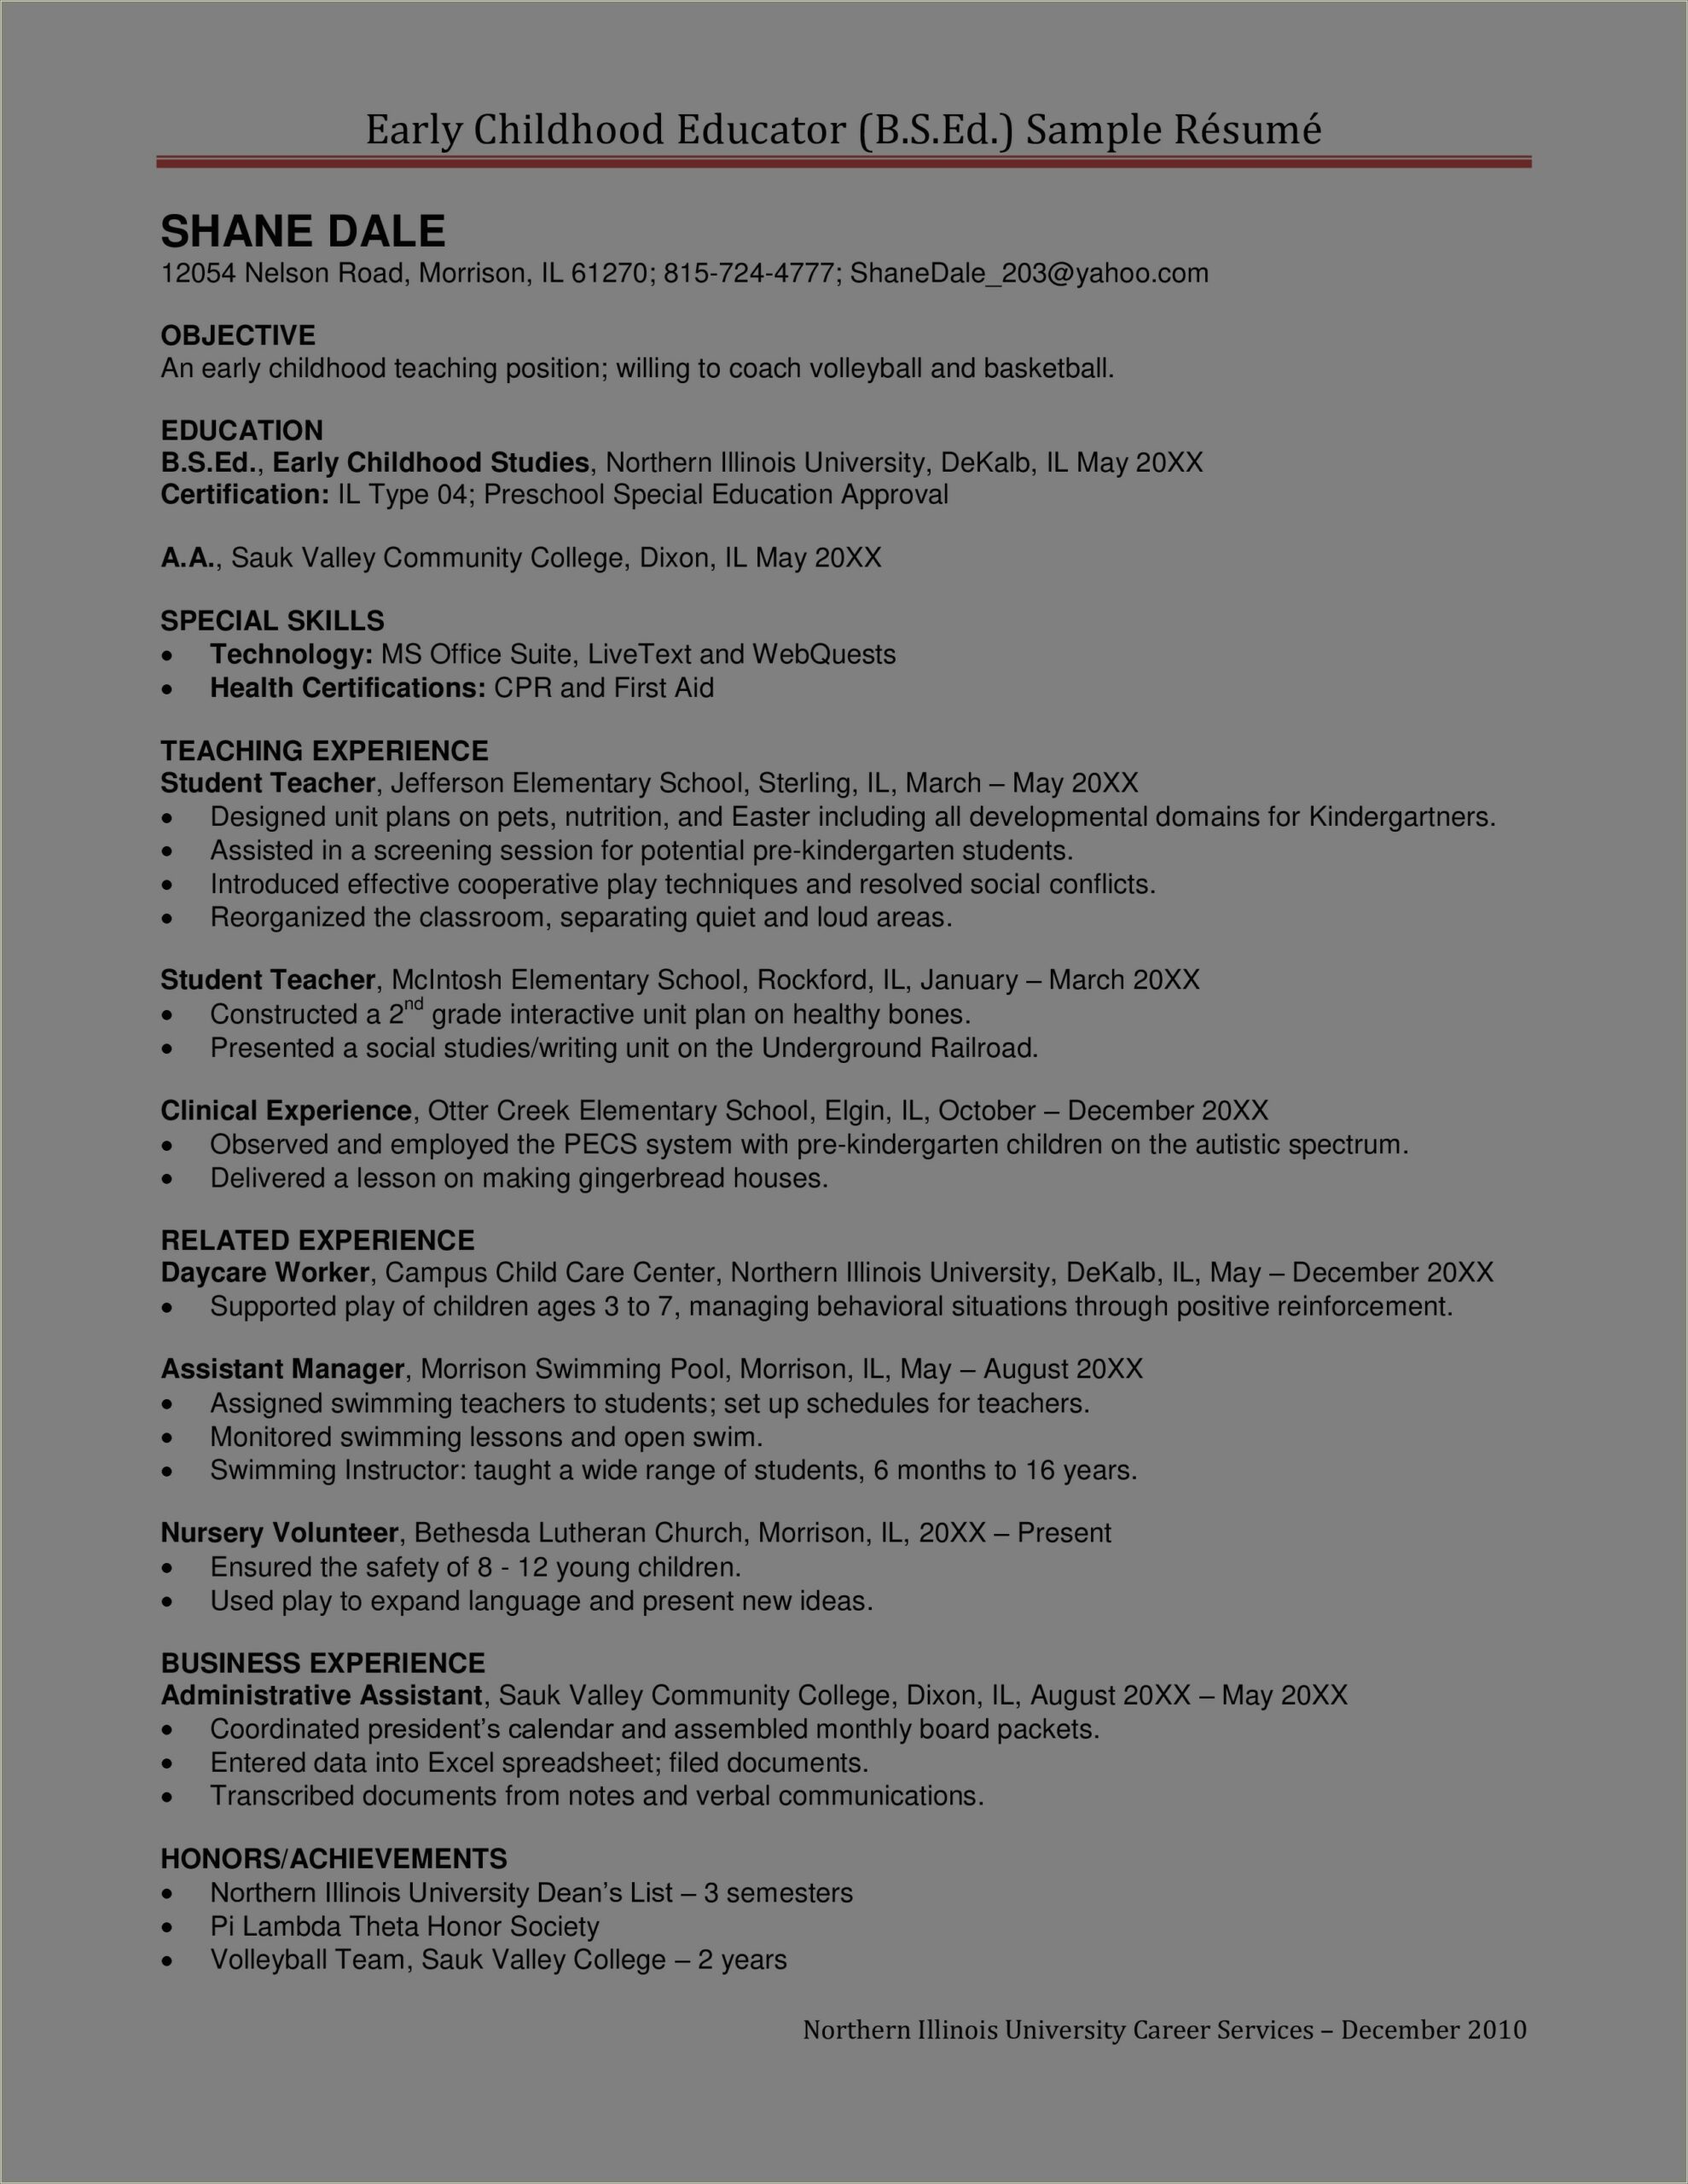 Sample Resume To Work In Childcare